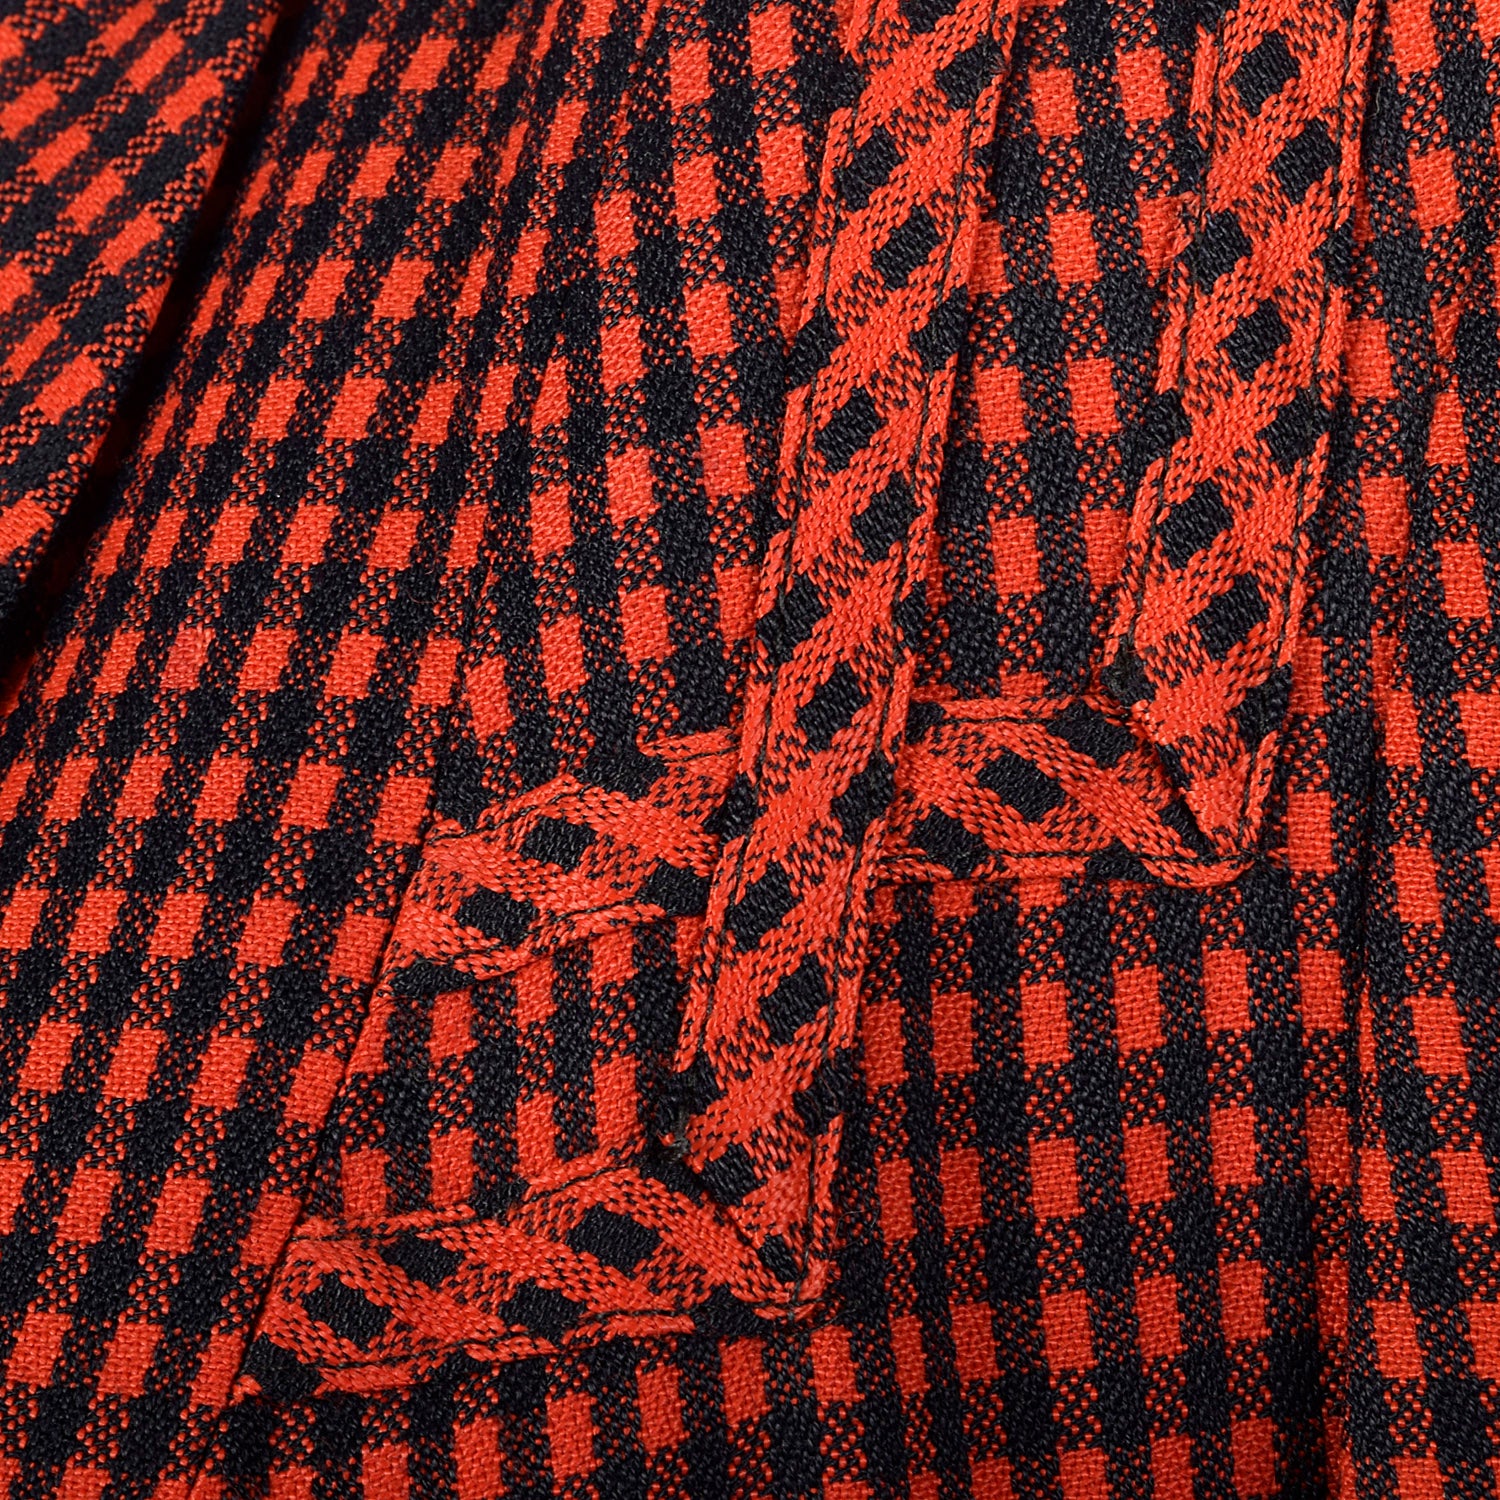 Medium 1940s Red and Black Check Jacket